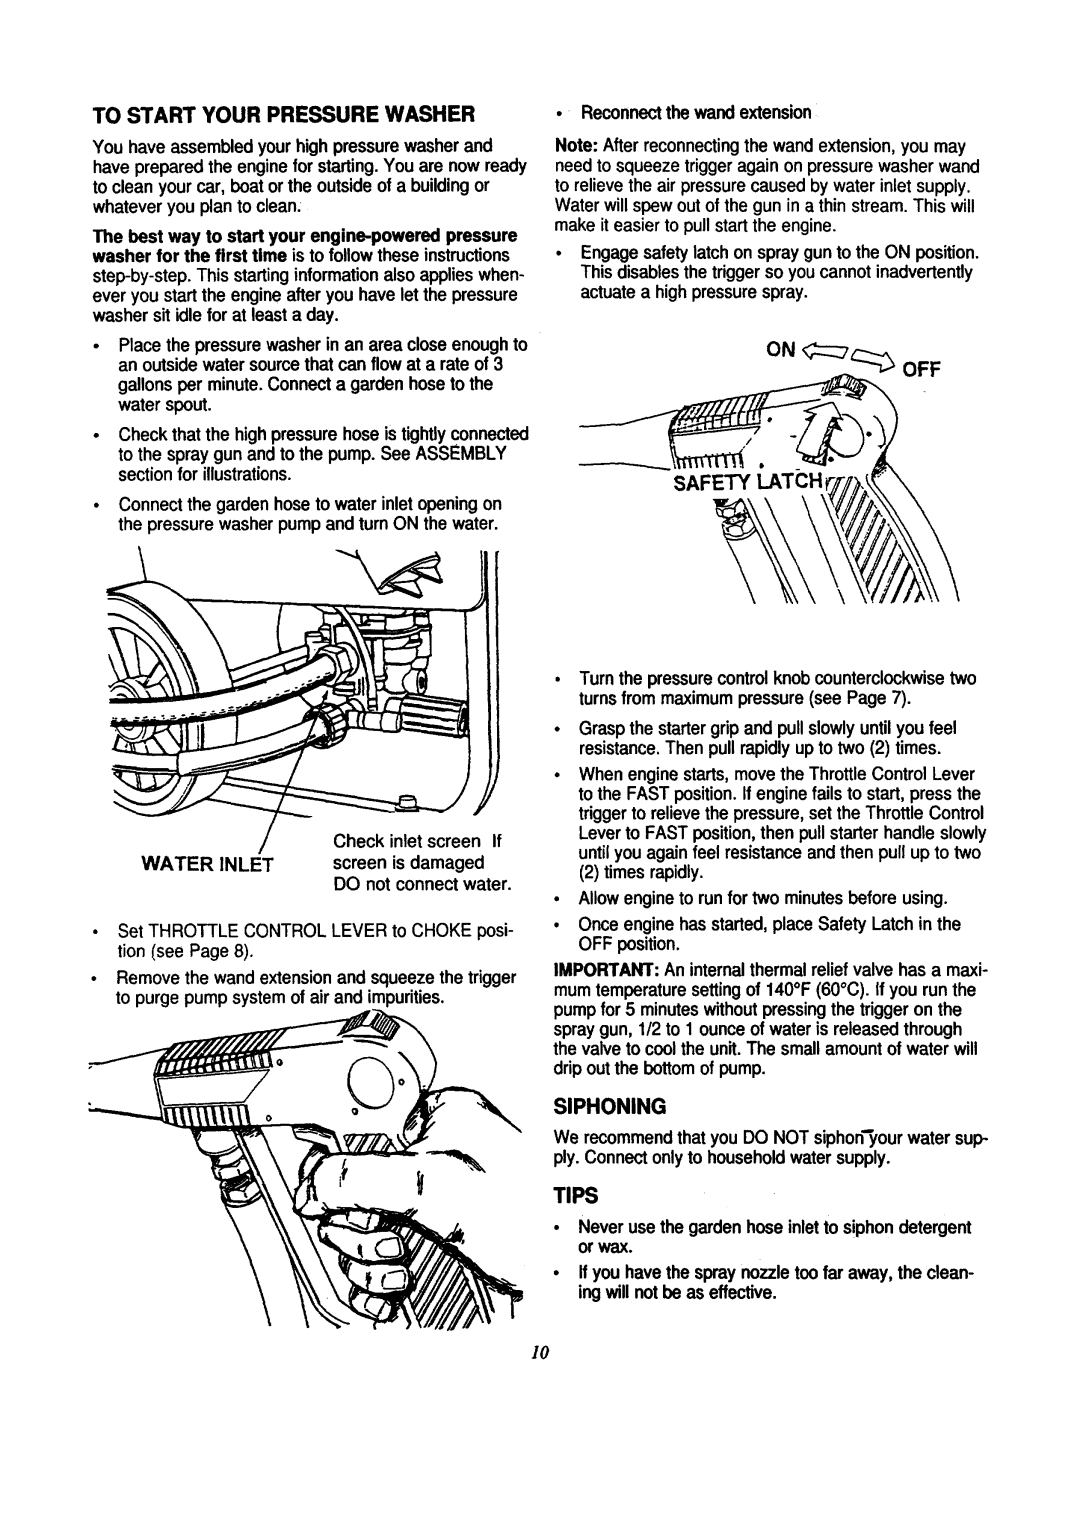 Craftsman 580.76225 owner manual Tips, To Start Your Pressure Washer, On 